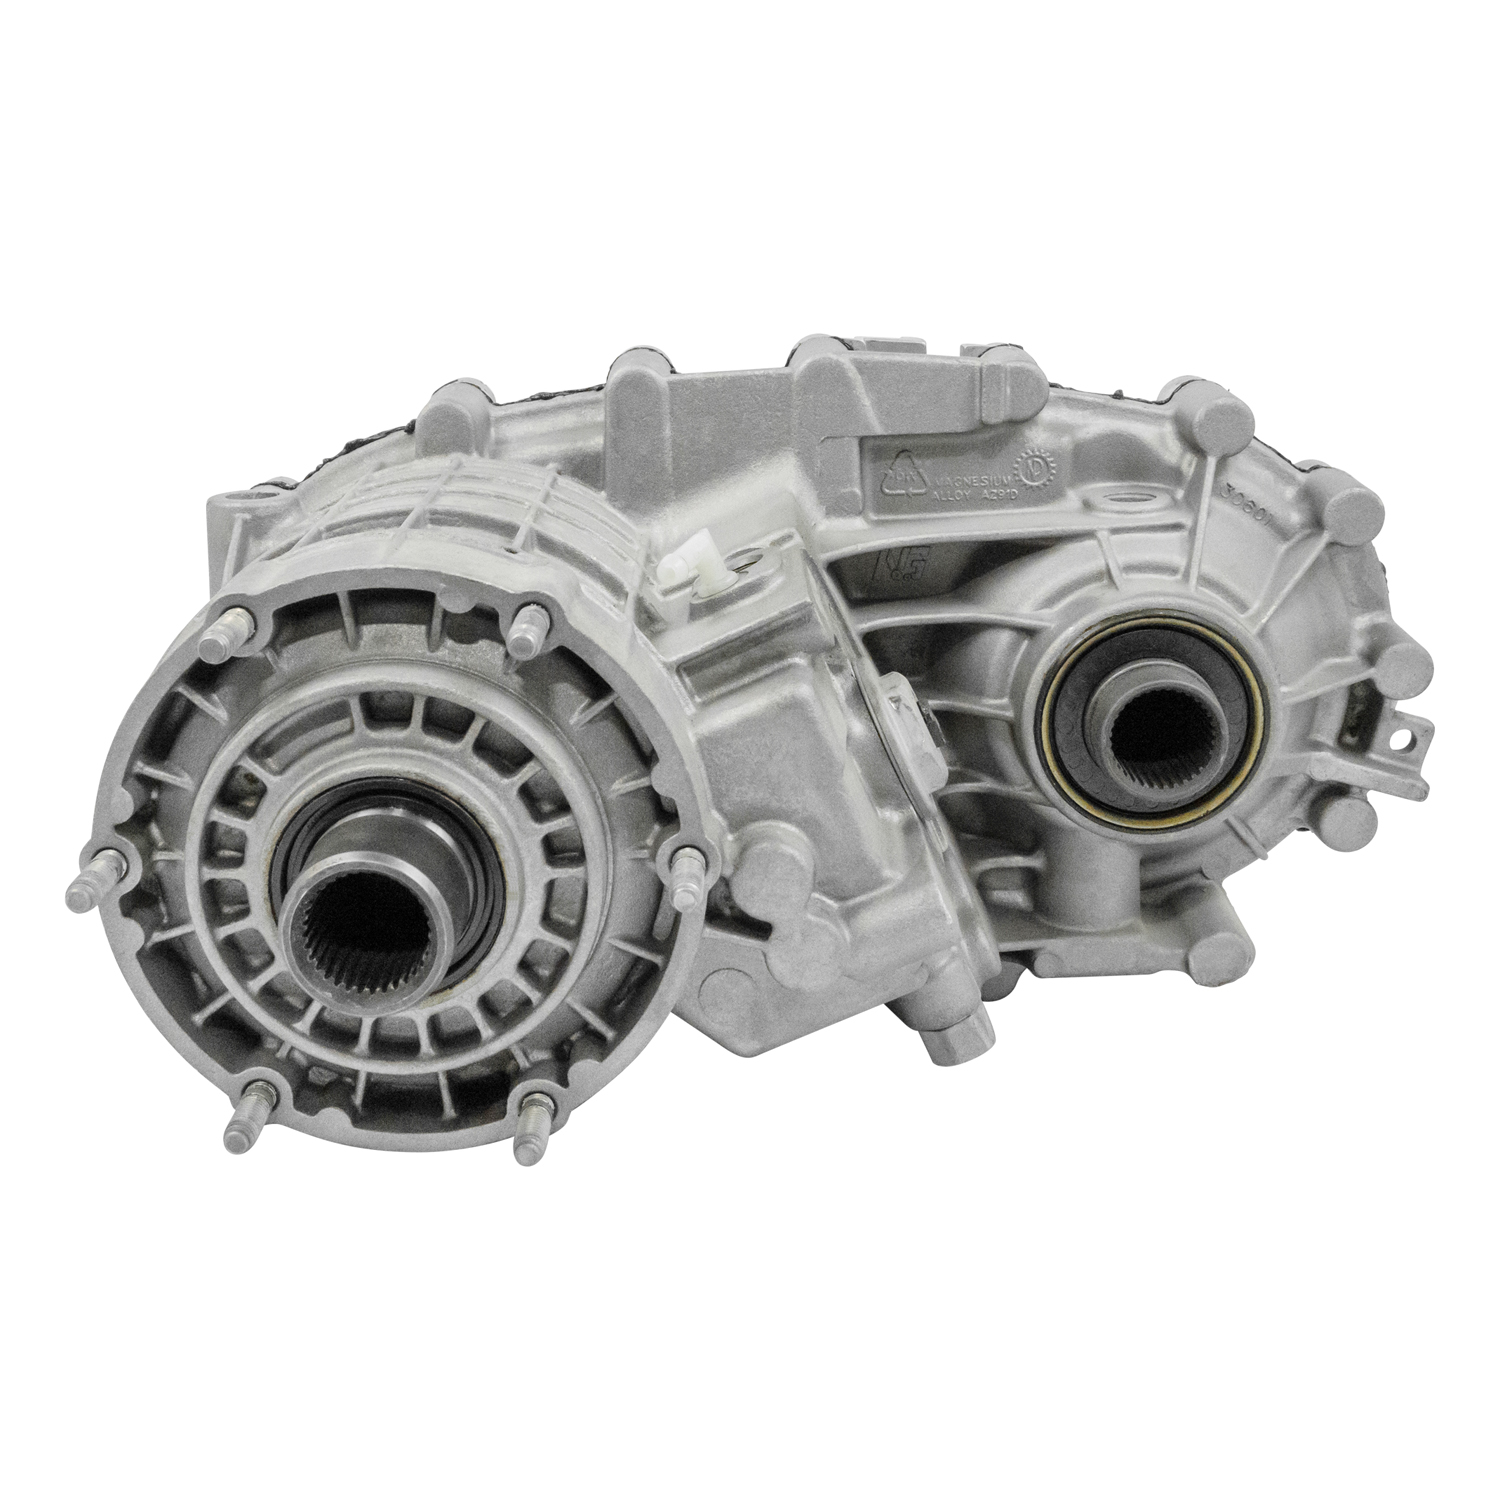 Zumbrota Remanufactured NP261 Transfer Case for ‘99-07 GM 1500/2500/3500 Pickups